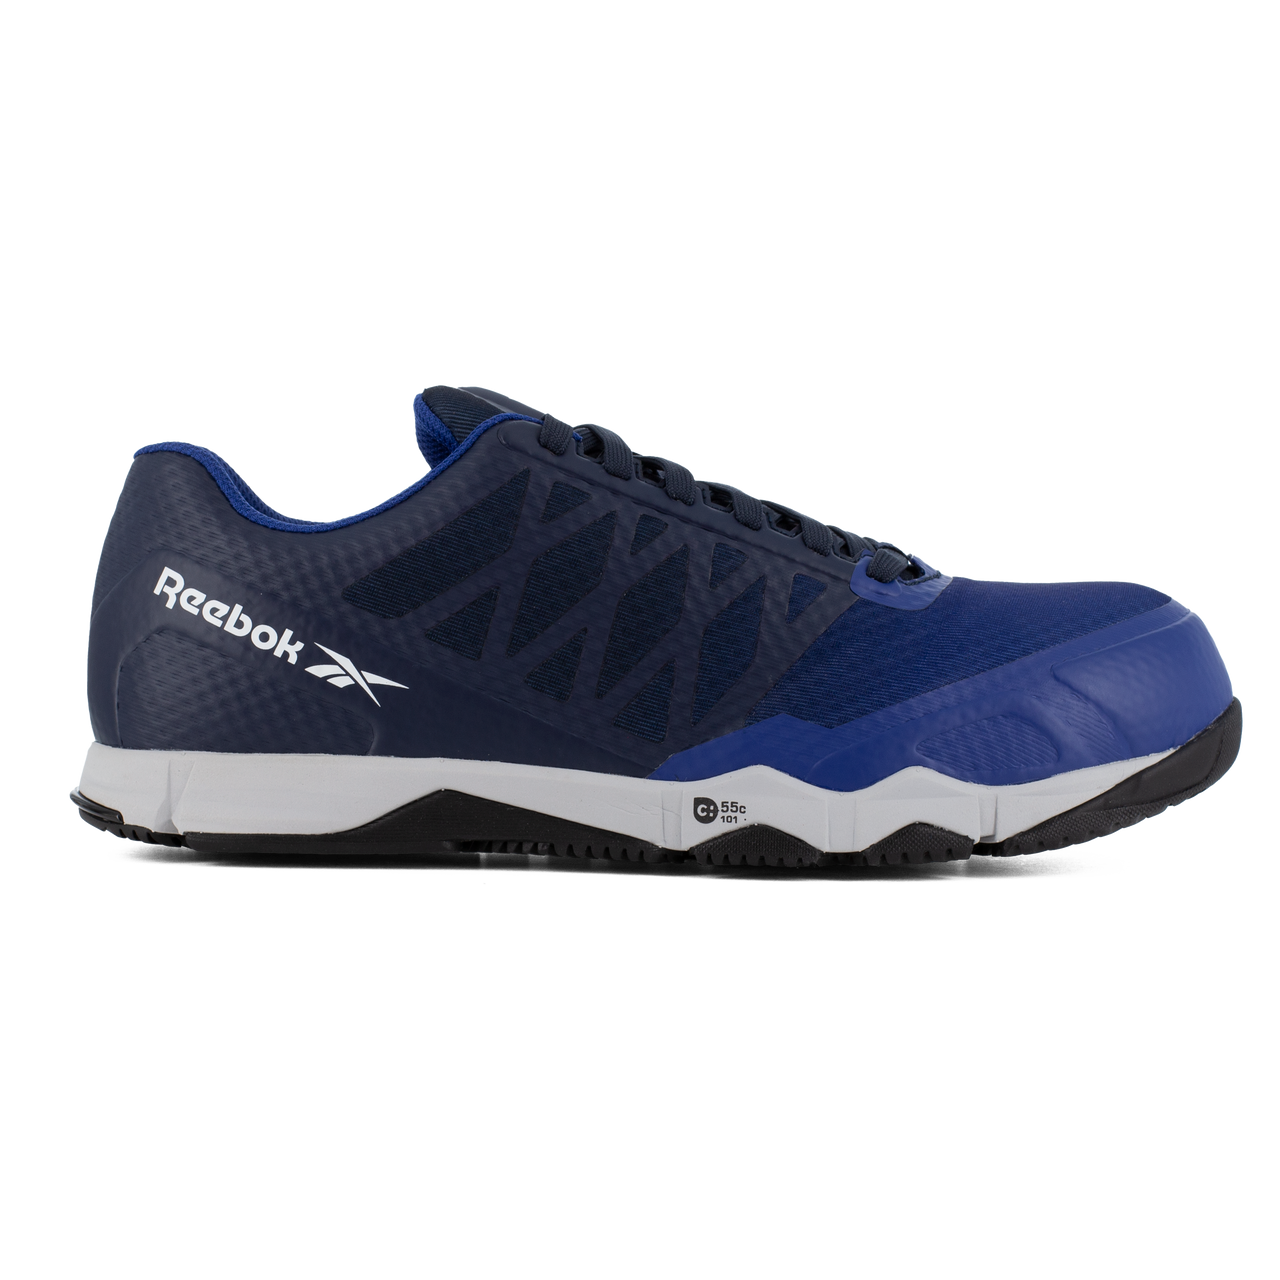 Reebok Speed TR Work - RB4451 - Men's Composite Toe Safety Shoes